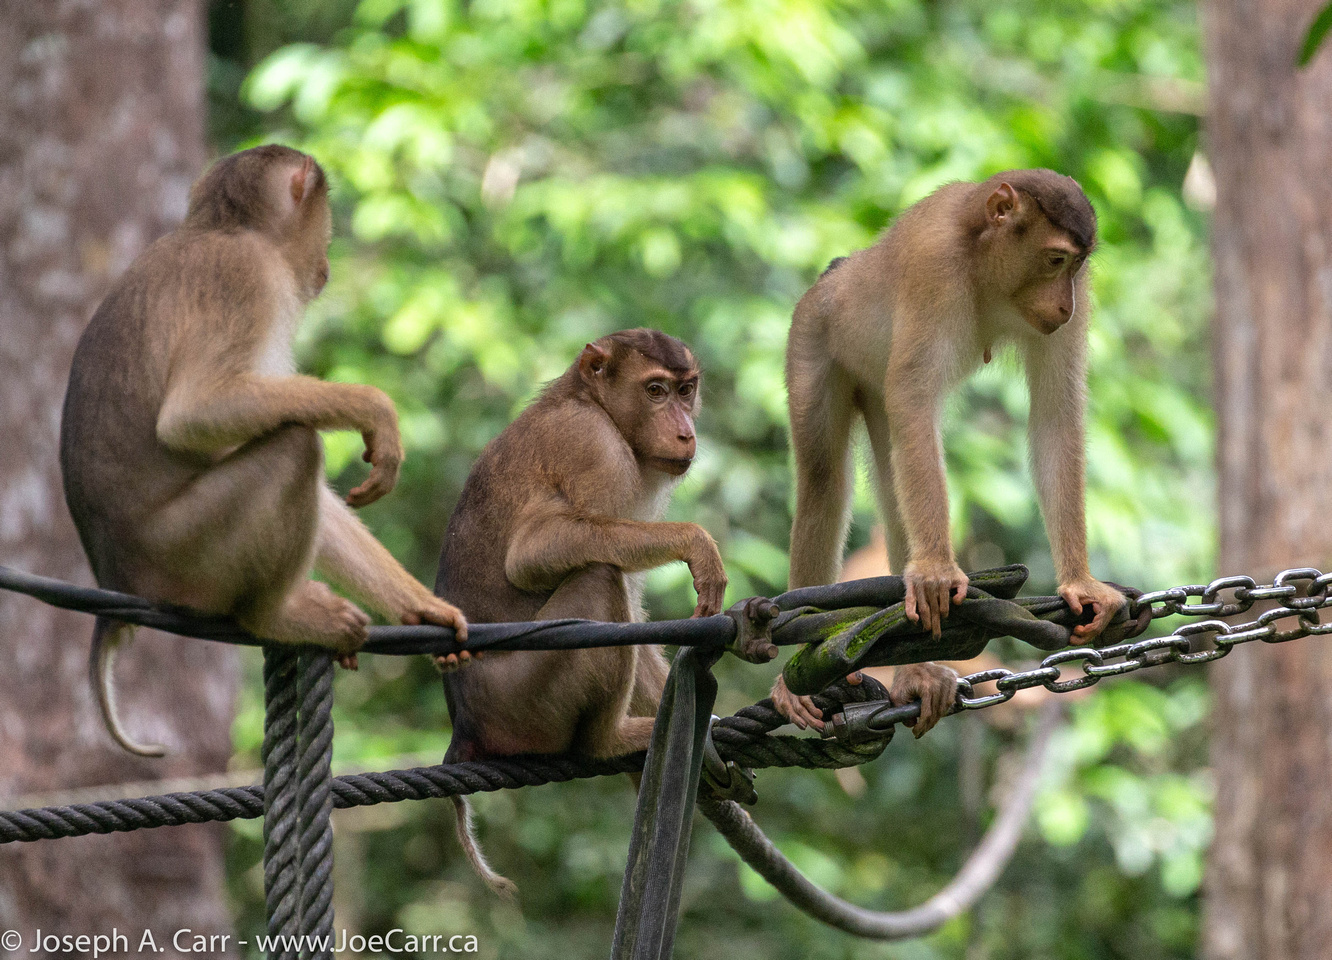 A trio of Pigtailed Macaque monkeys waiting at the feeding station